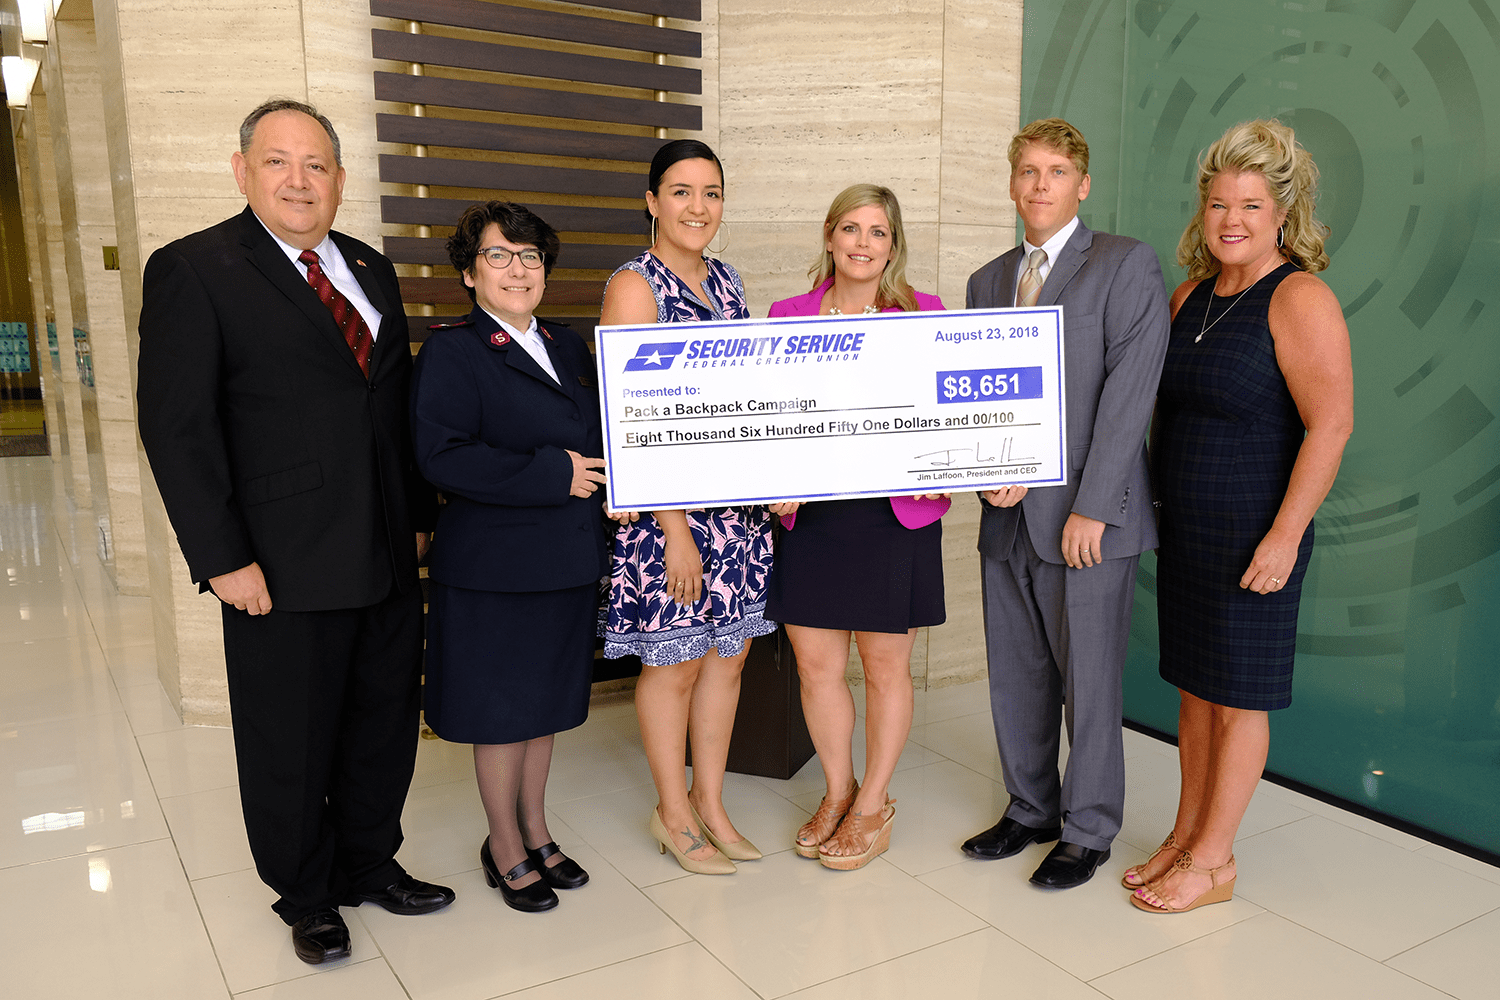 We were honored to receive a $8,651 donation from Security Service Federal Credit Union (SSFCU)